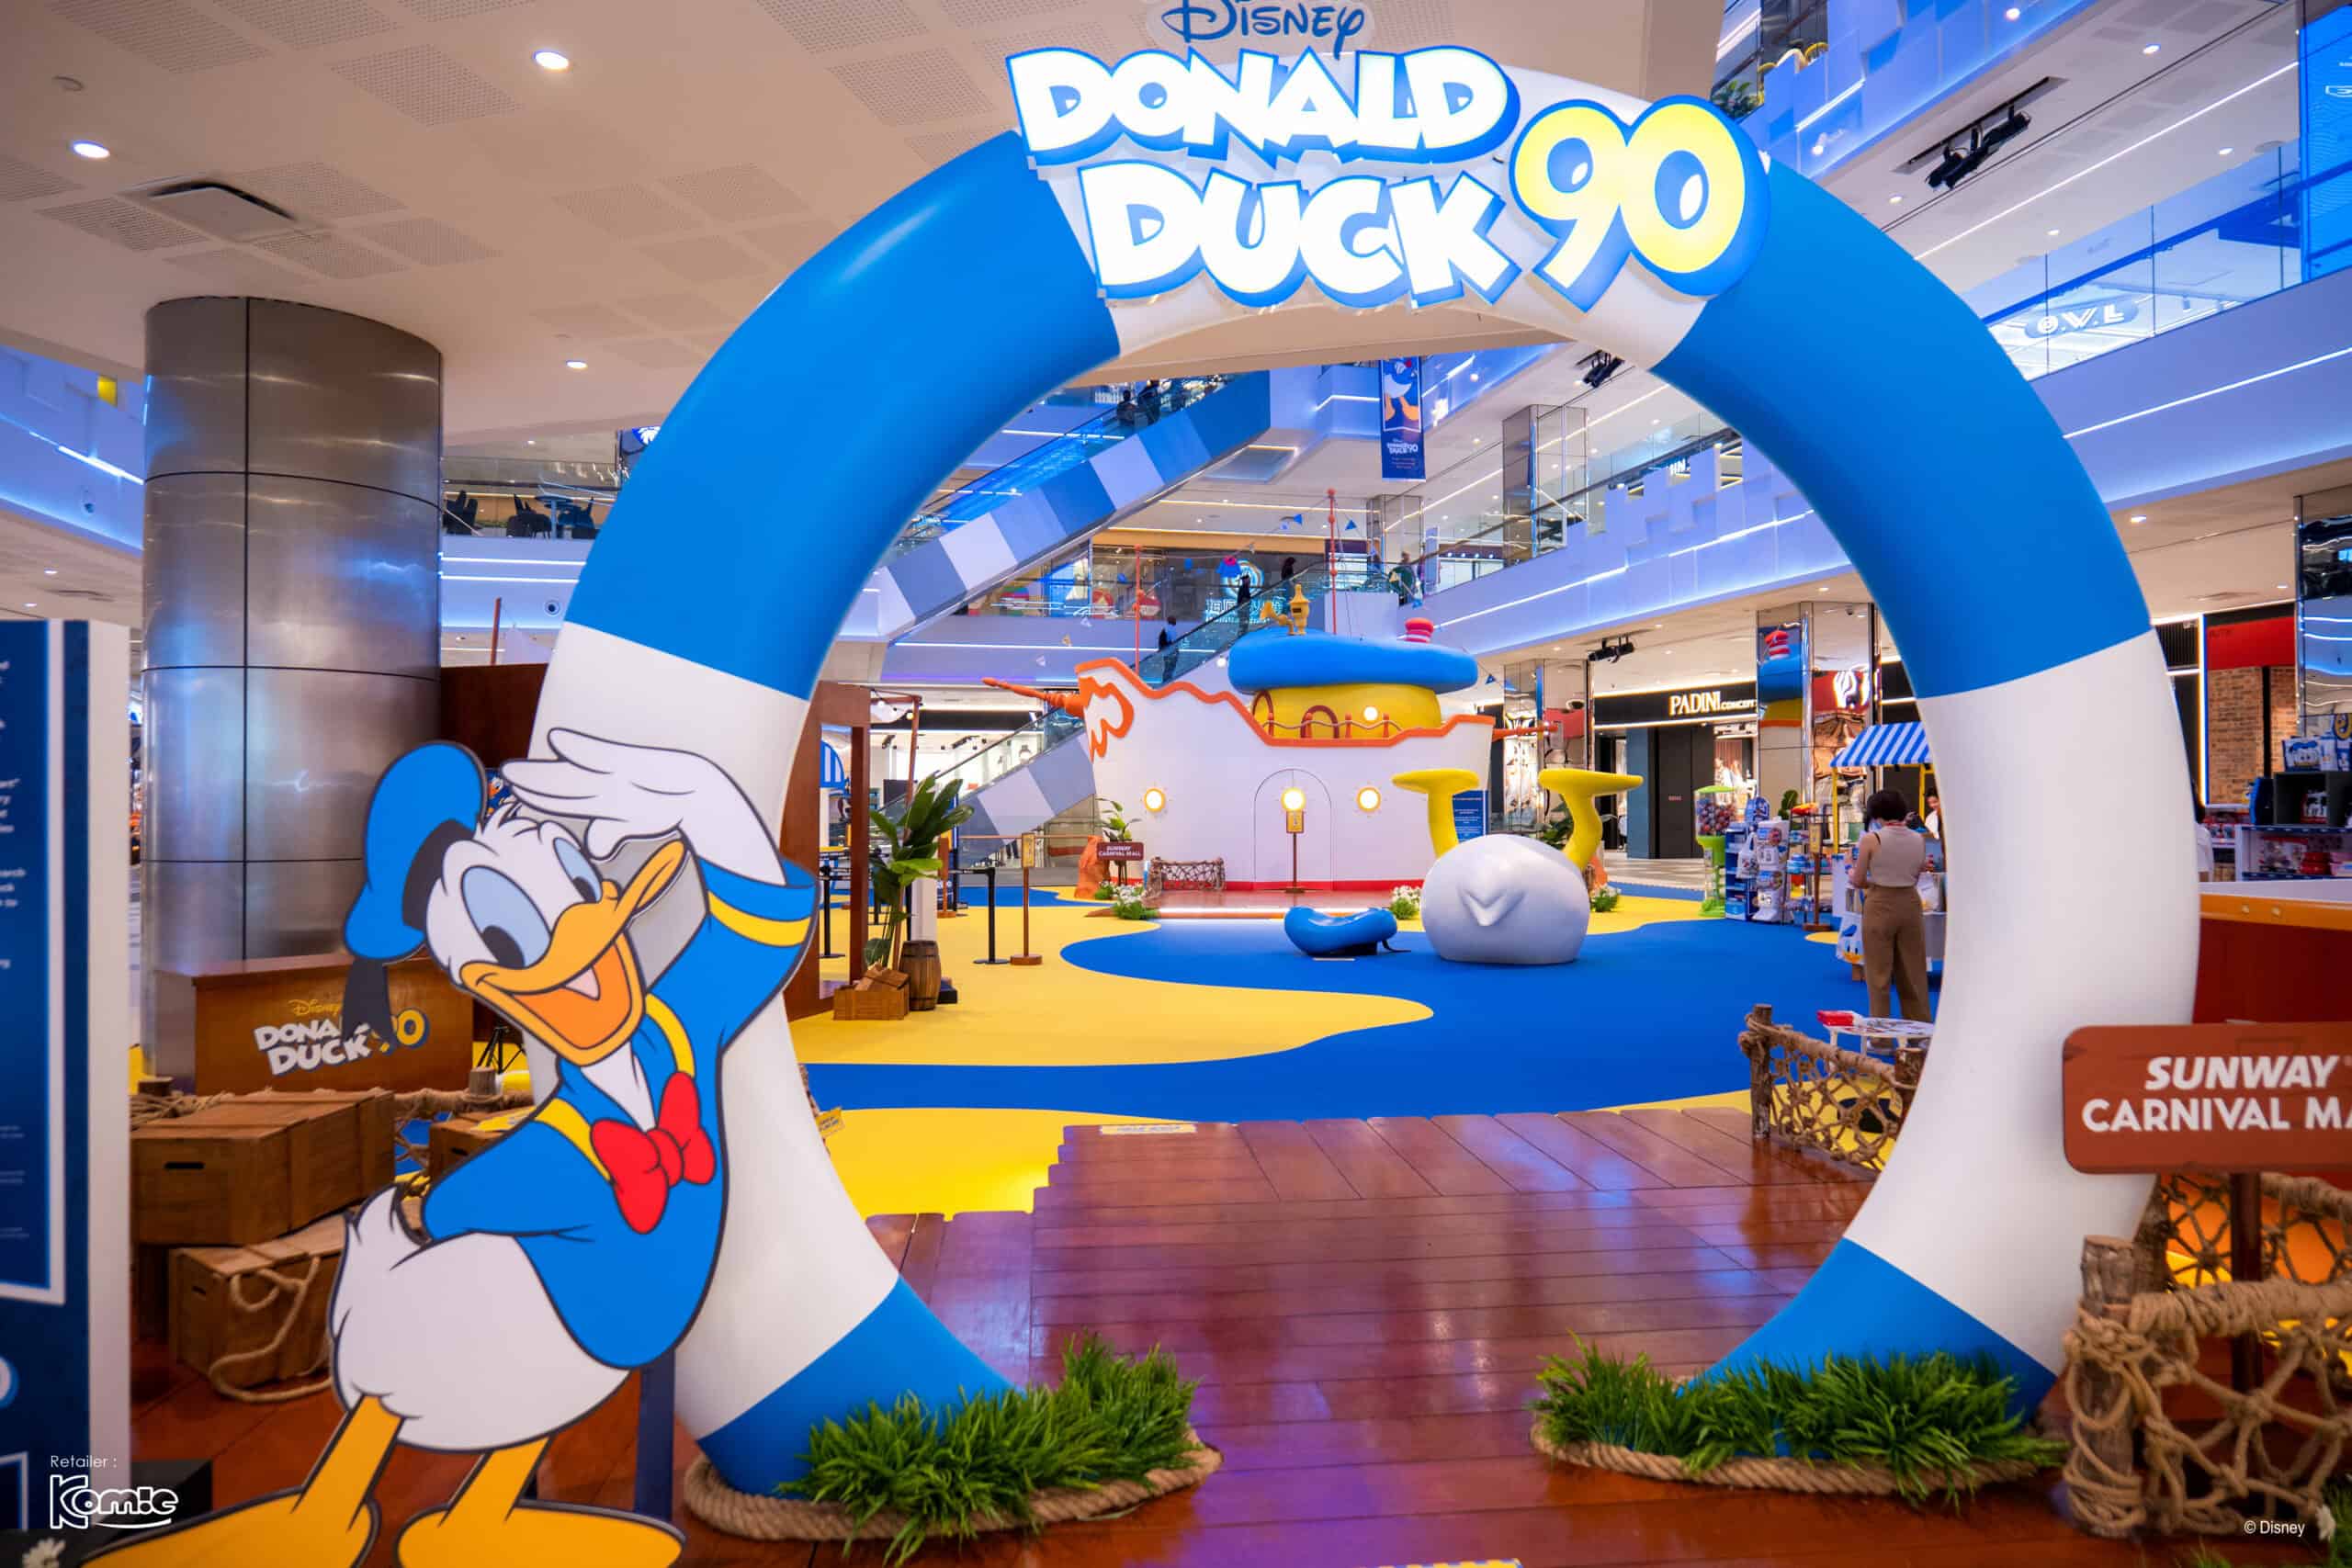 Celebrating 90 years of Donald Duck: You’re invited to a quack-tasticbirthday bash atSunway Carnival Mall and Sunway Pyramid!